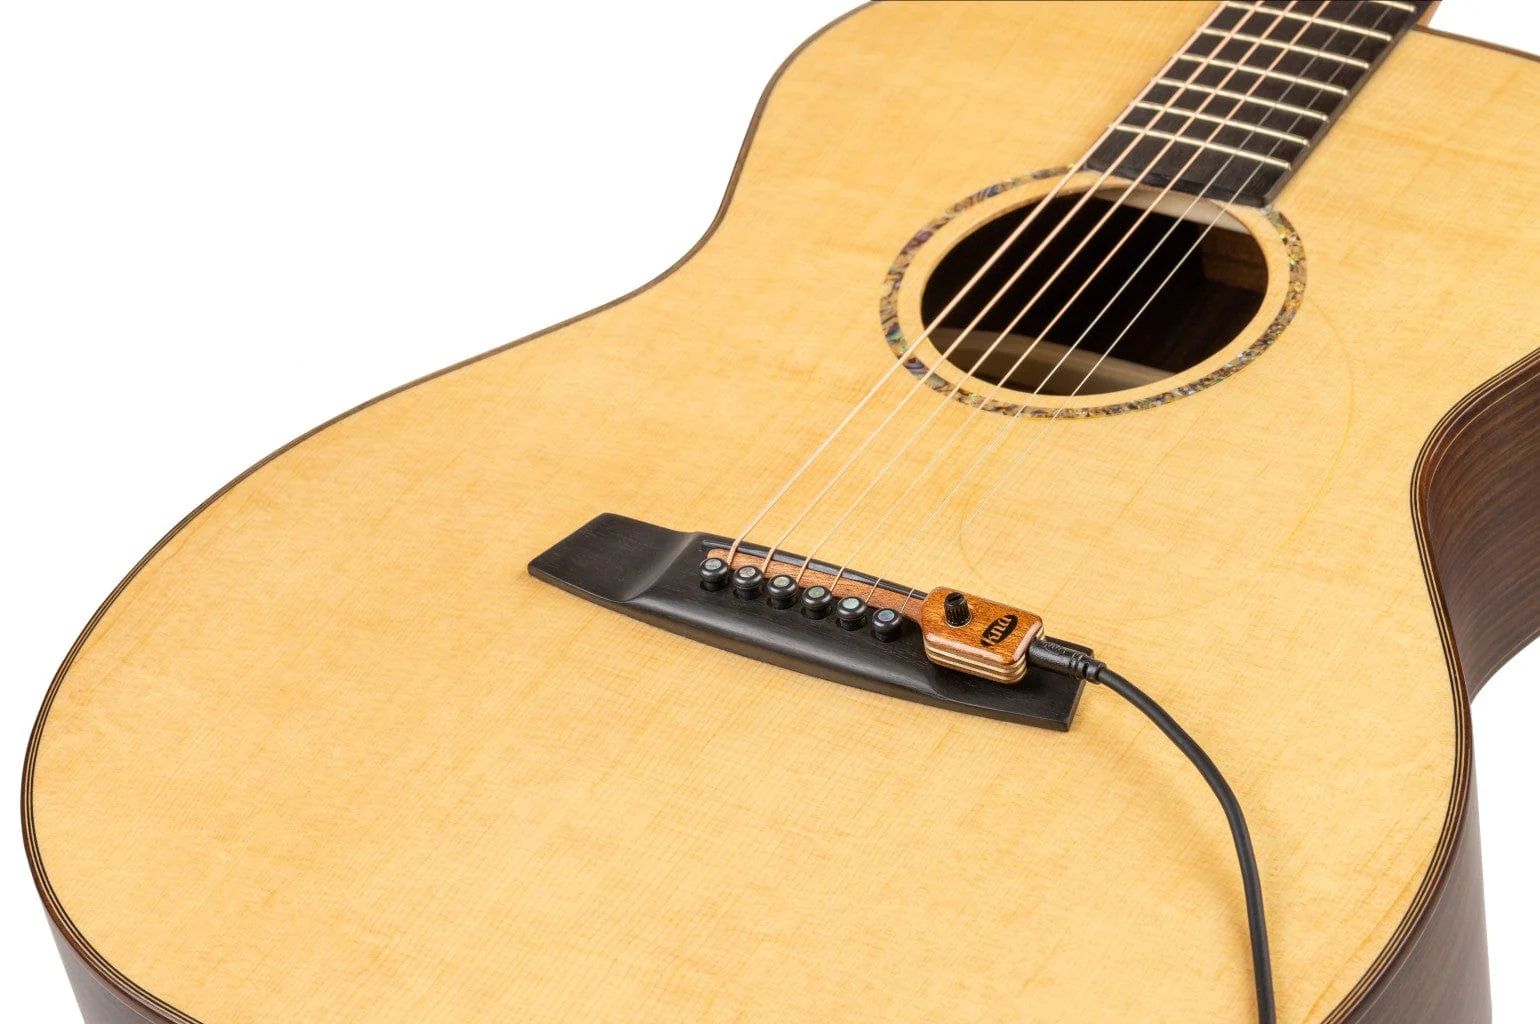 How To Add Pickup To Acoustic Guitar